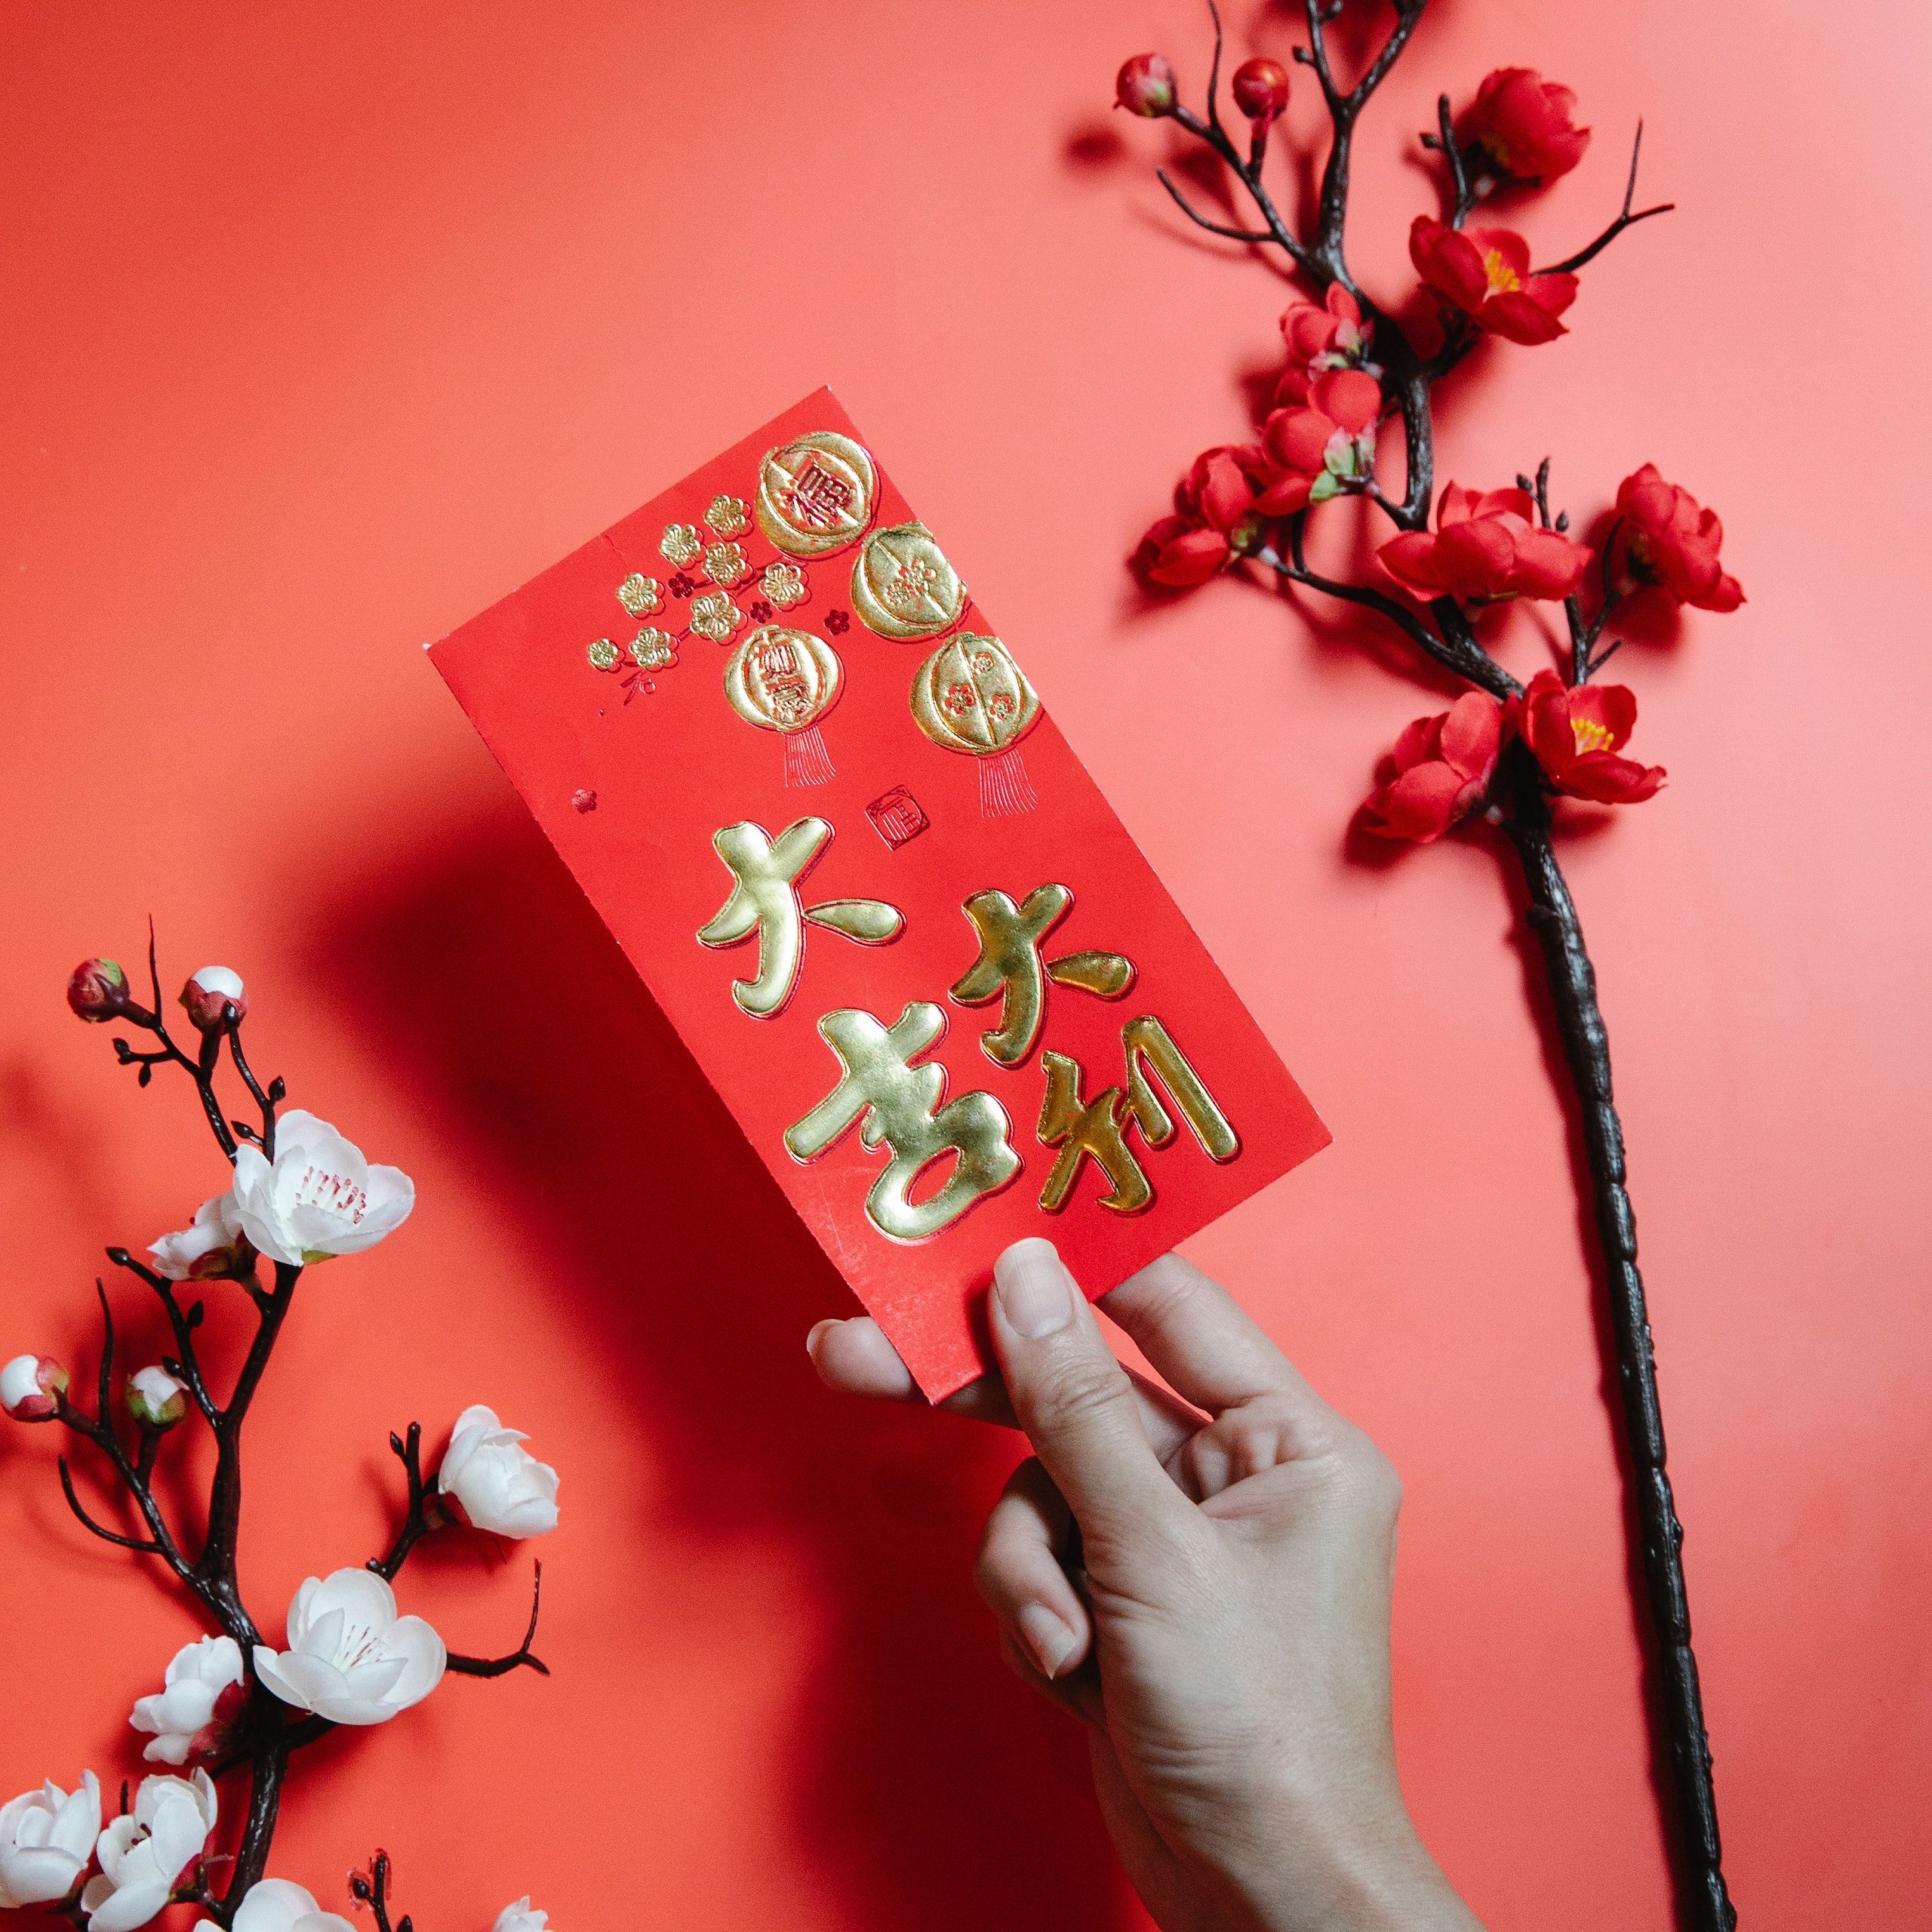 Red Pocket Envelope 2022 Chinese New Year Baby Gift Spring Festival Red  Envelope - China Brocade Red Envelope and Money Pocket price